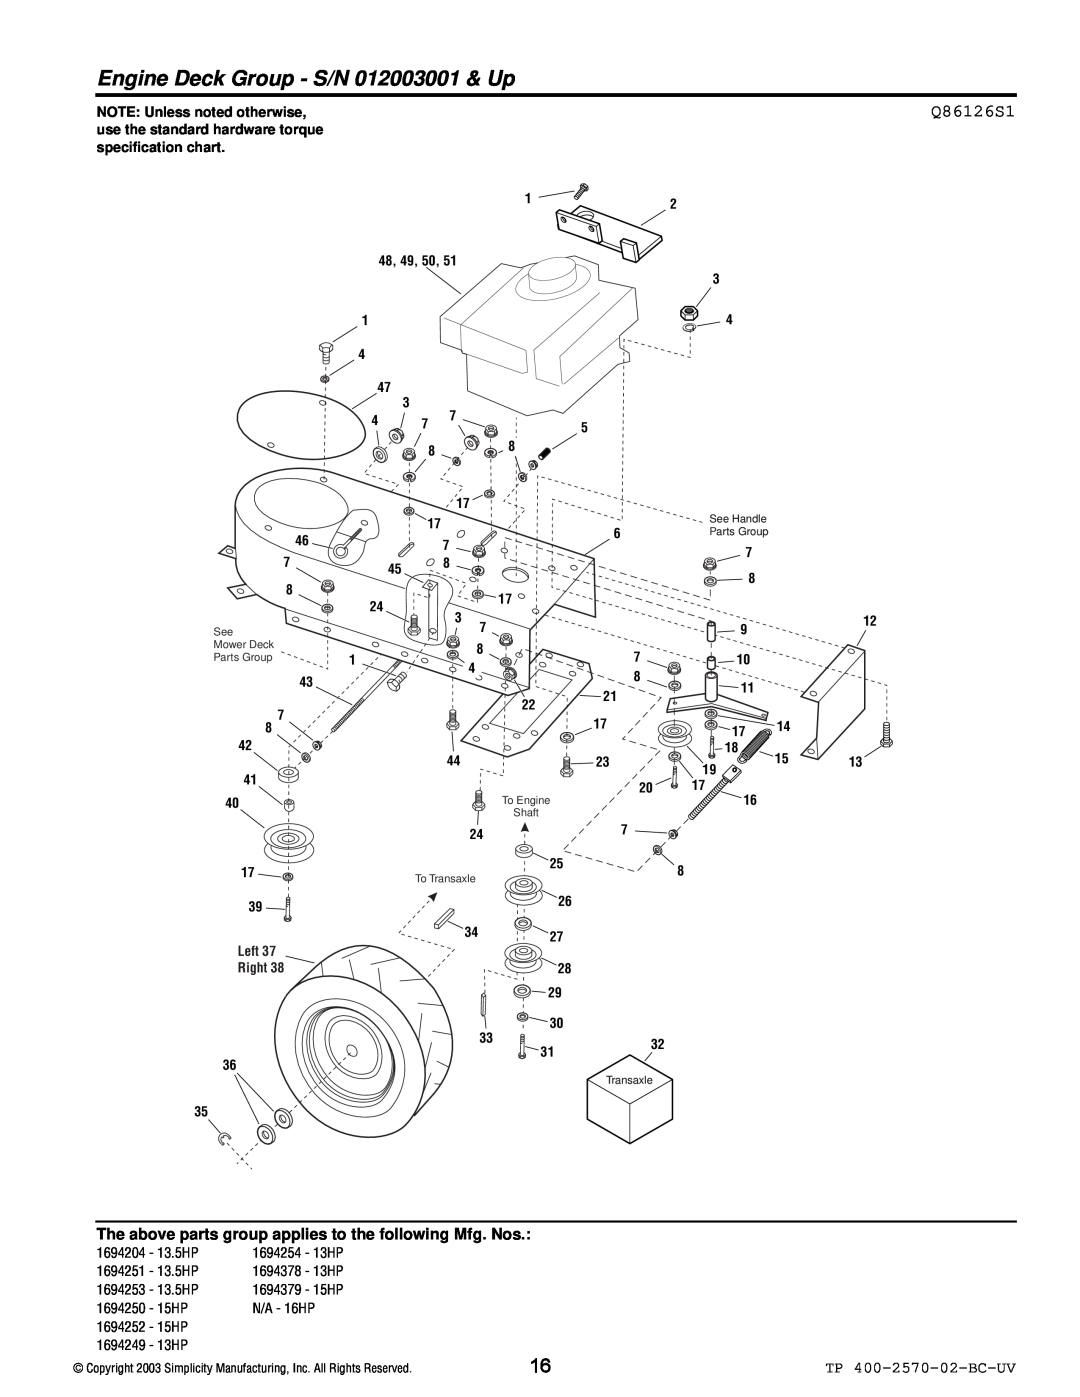 Simplicity 16HP Engine Deck Group - S/N 012003001 & Up, Q86126S1, The above parts group applies to the following Mfg. Nos 